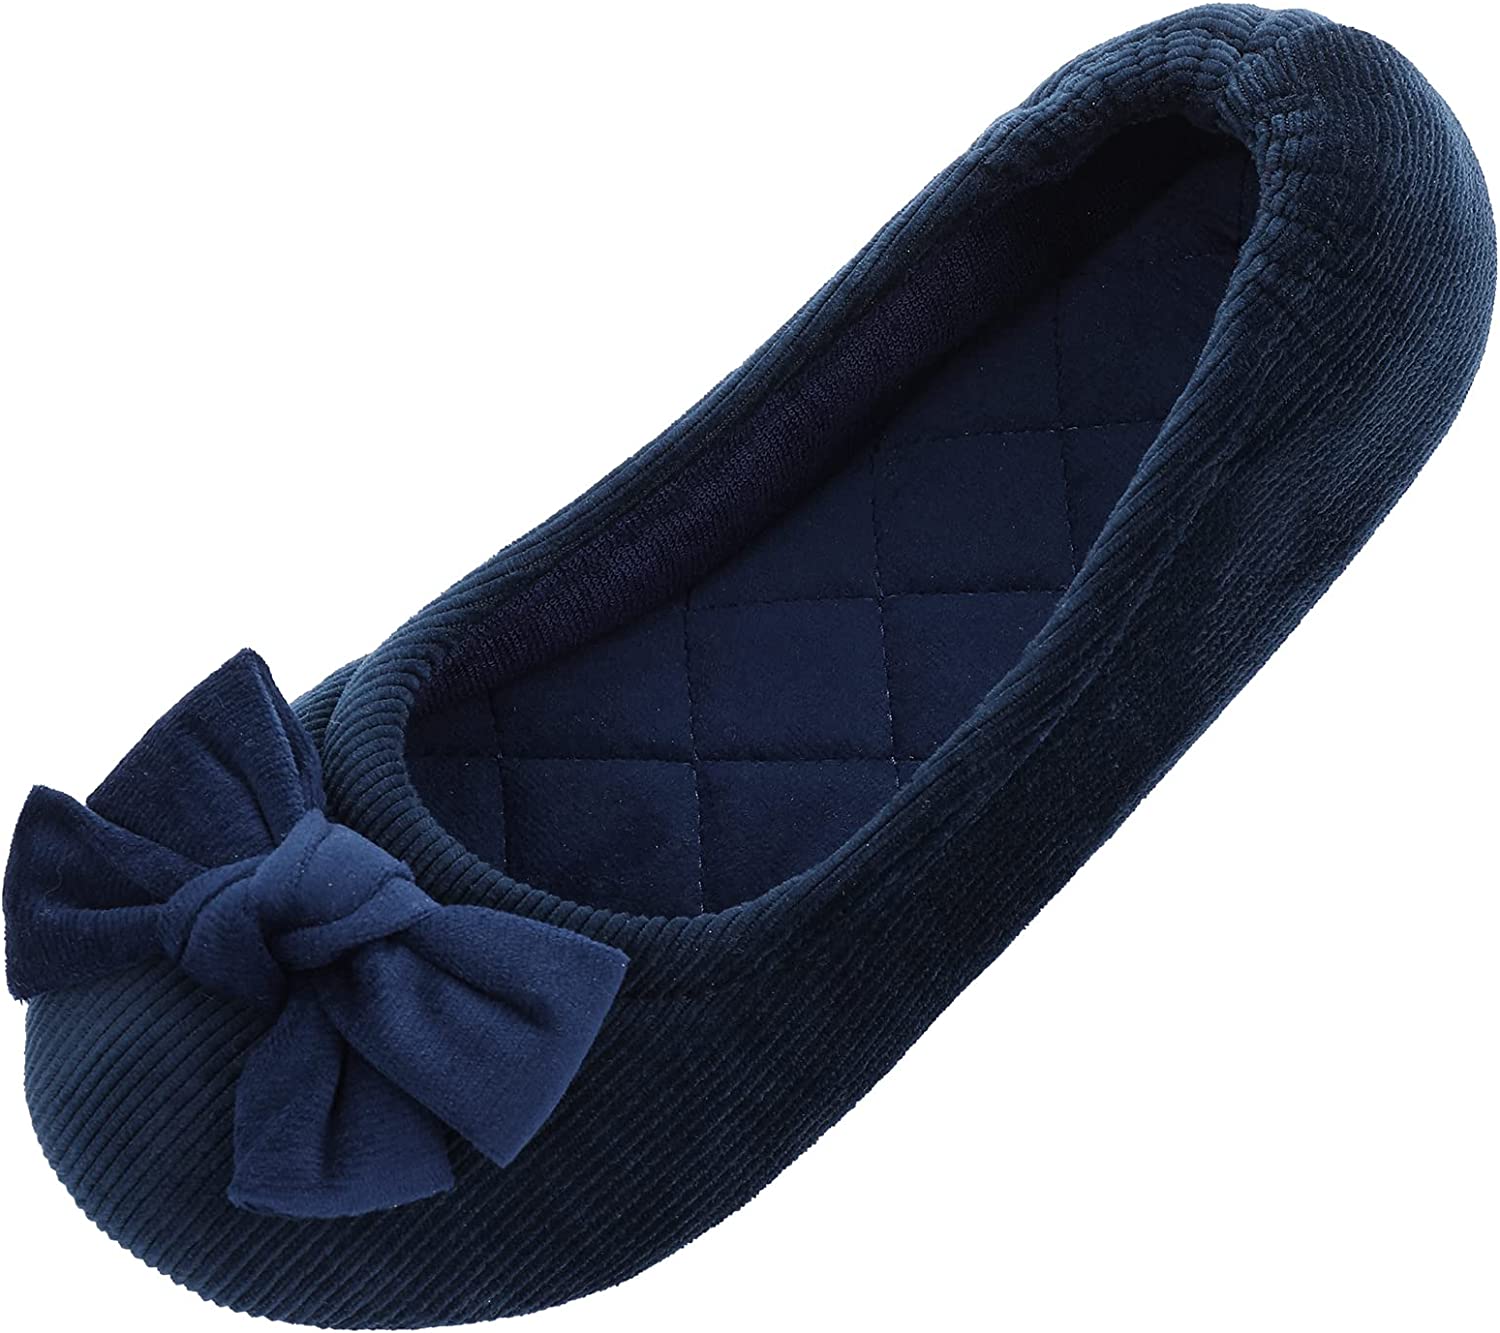 Womens Ballet Indoor Slippers with Bow | Foldable Lightweight Travel Slippers | eBay